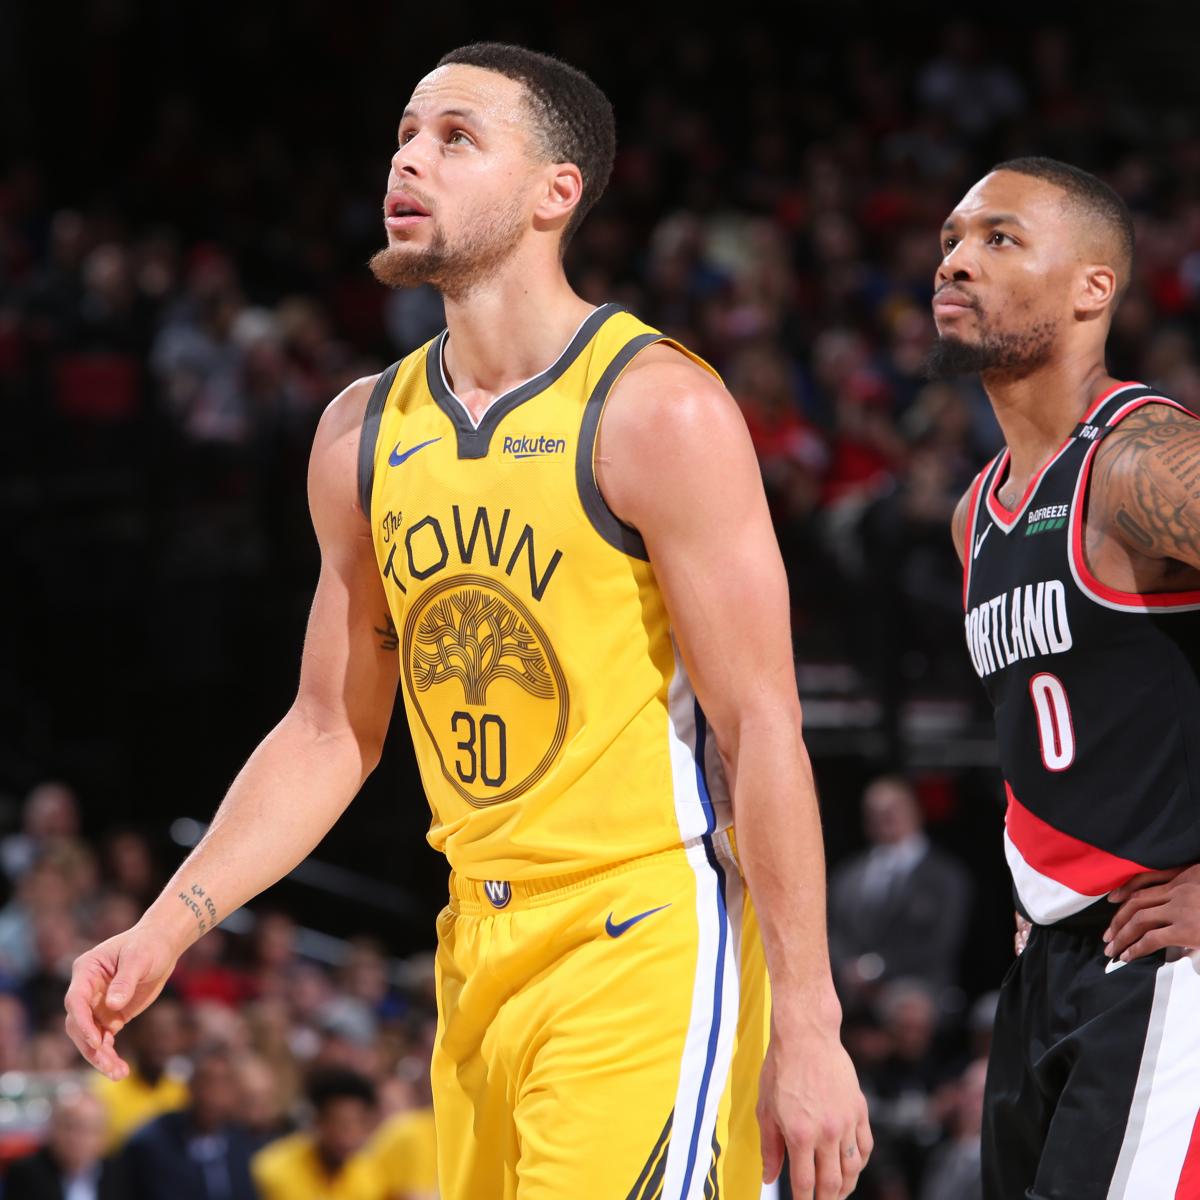 NBA Playoff Schedule 2019: Dates, Game Times and TV Info for Conference